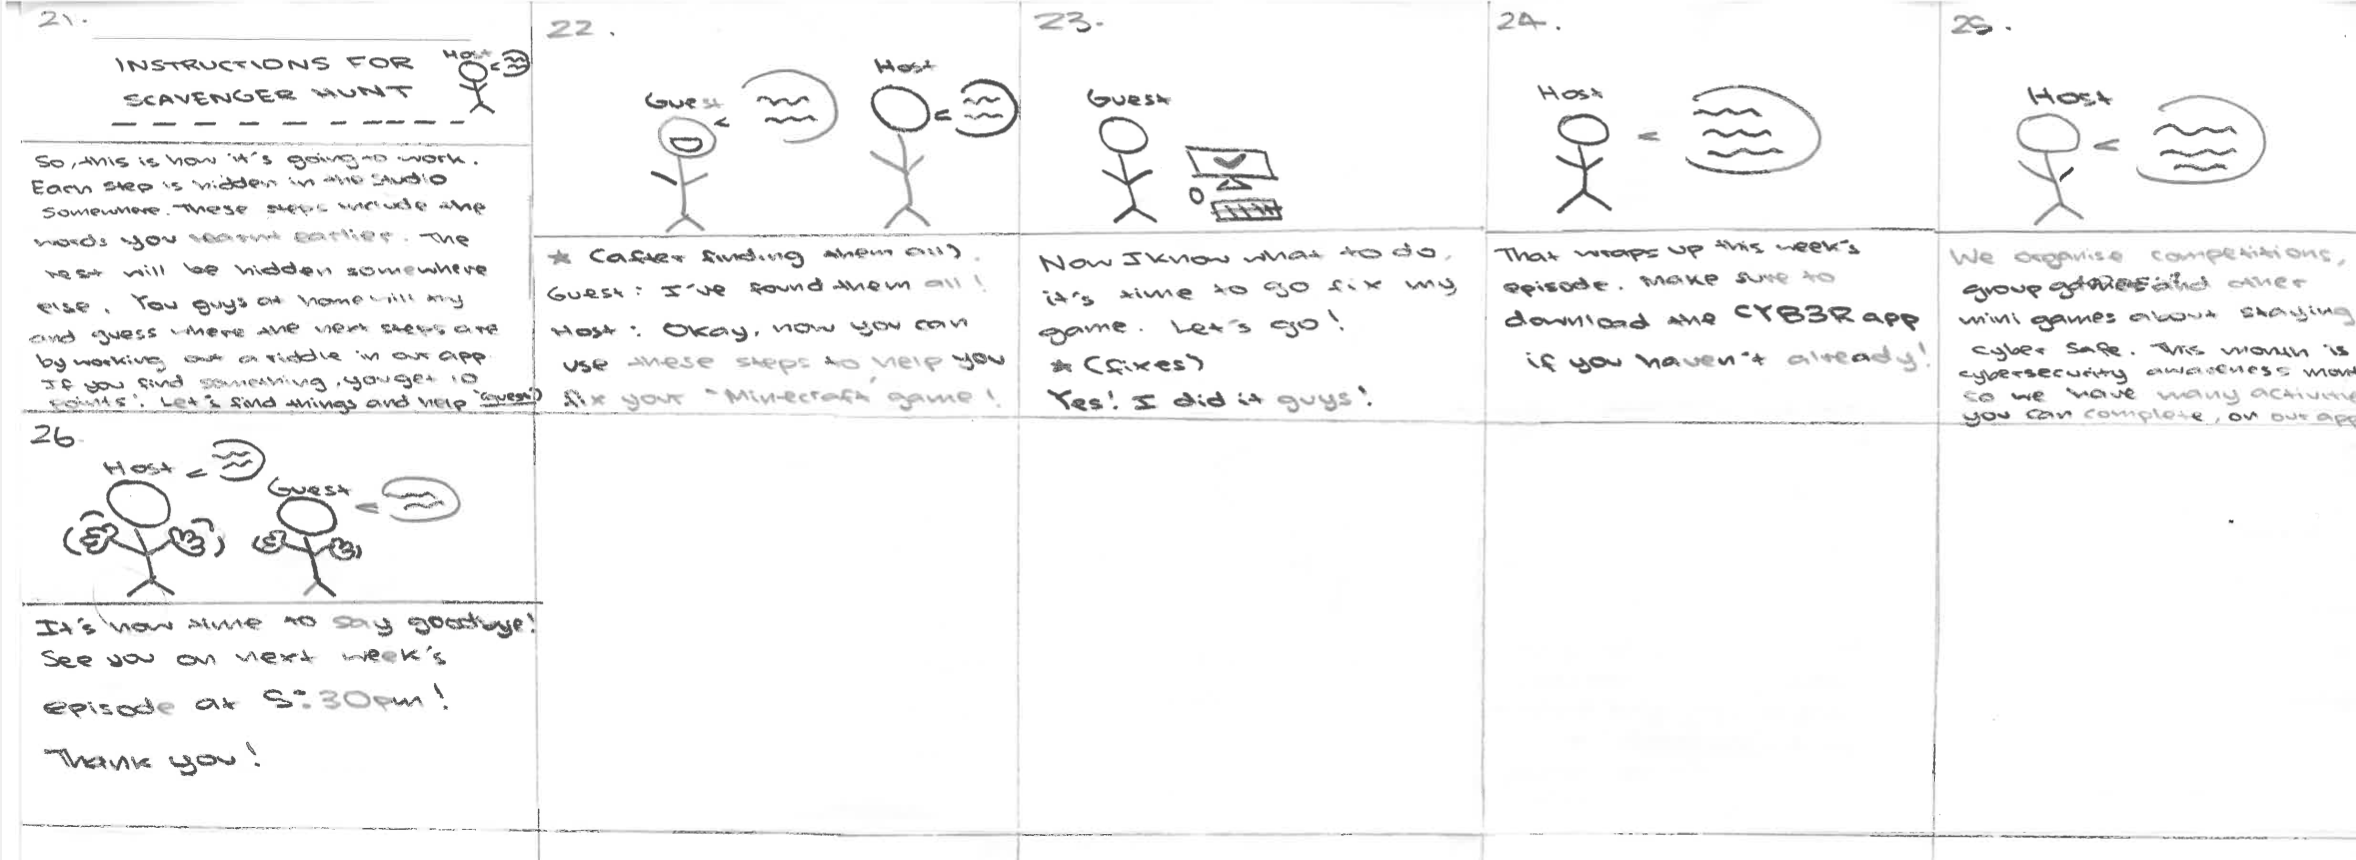 Storyboard of TV show (2)